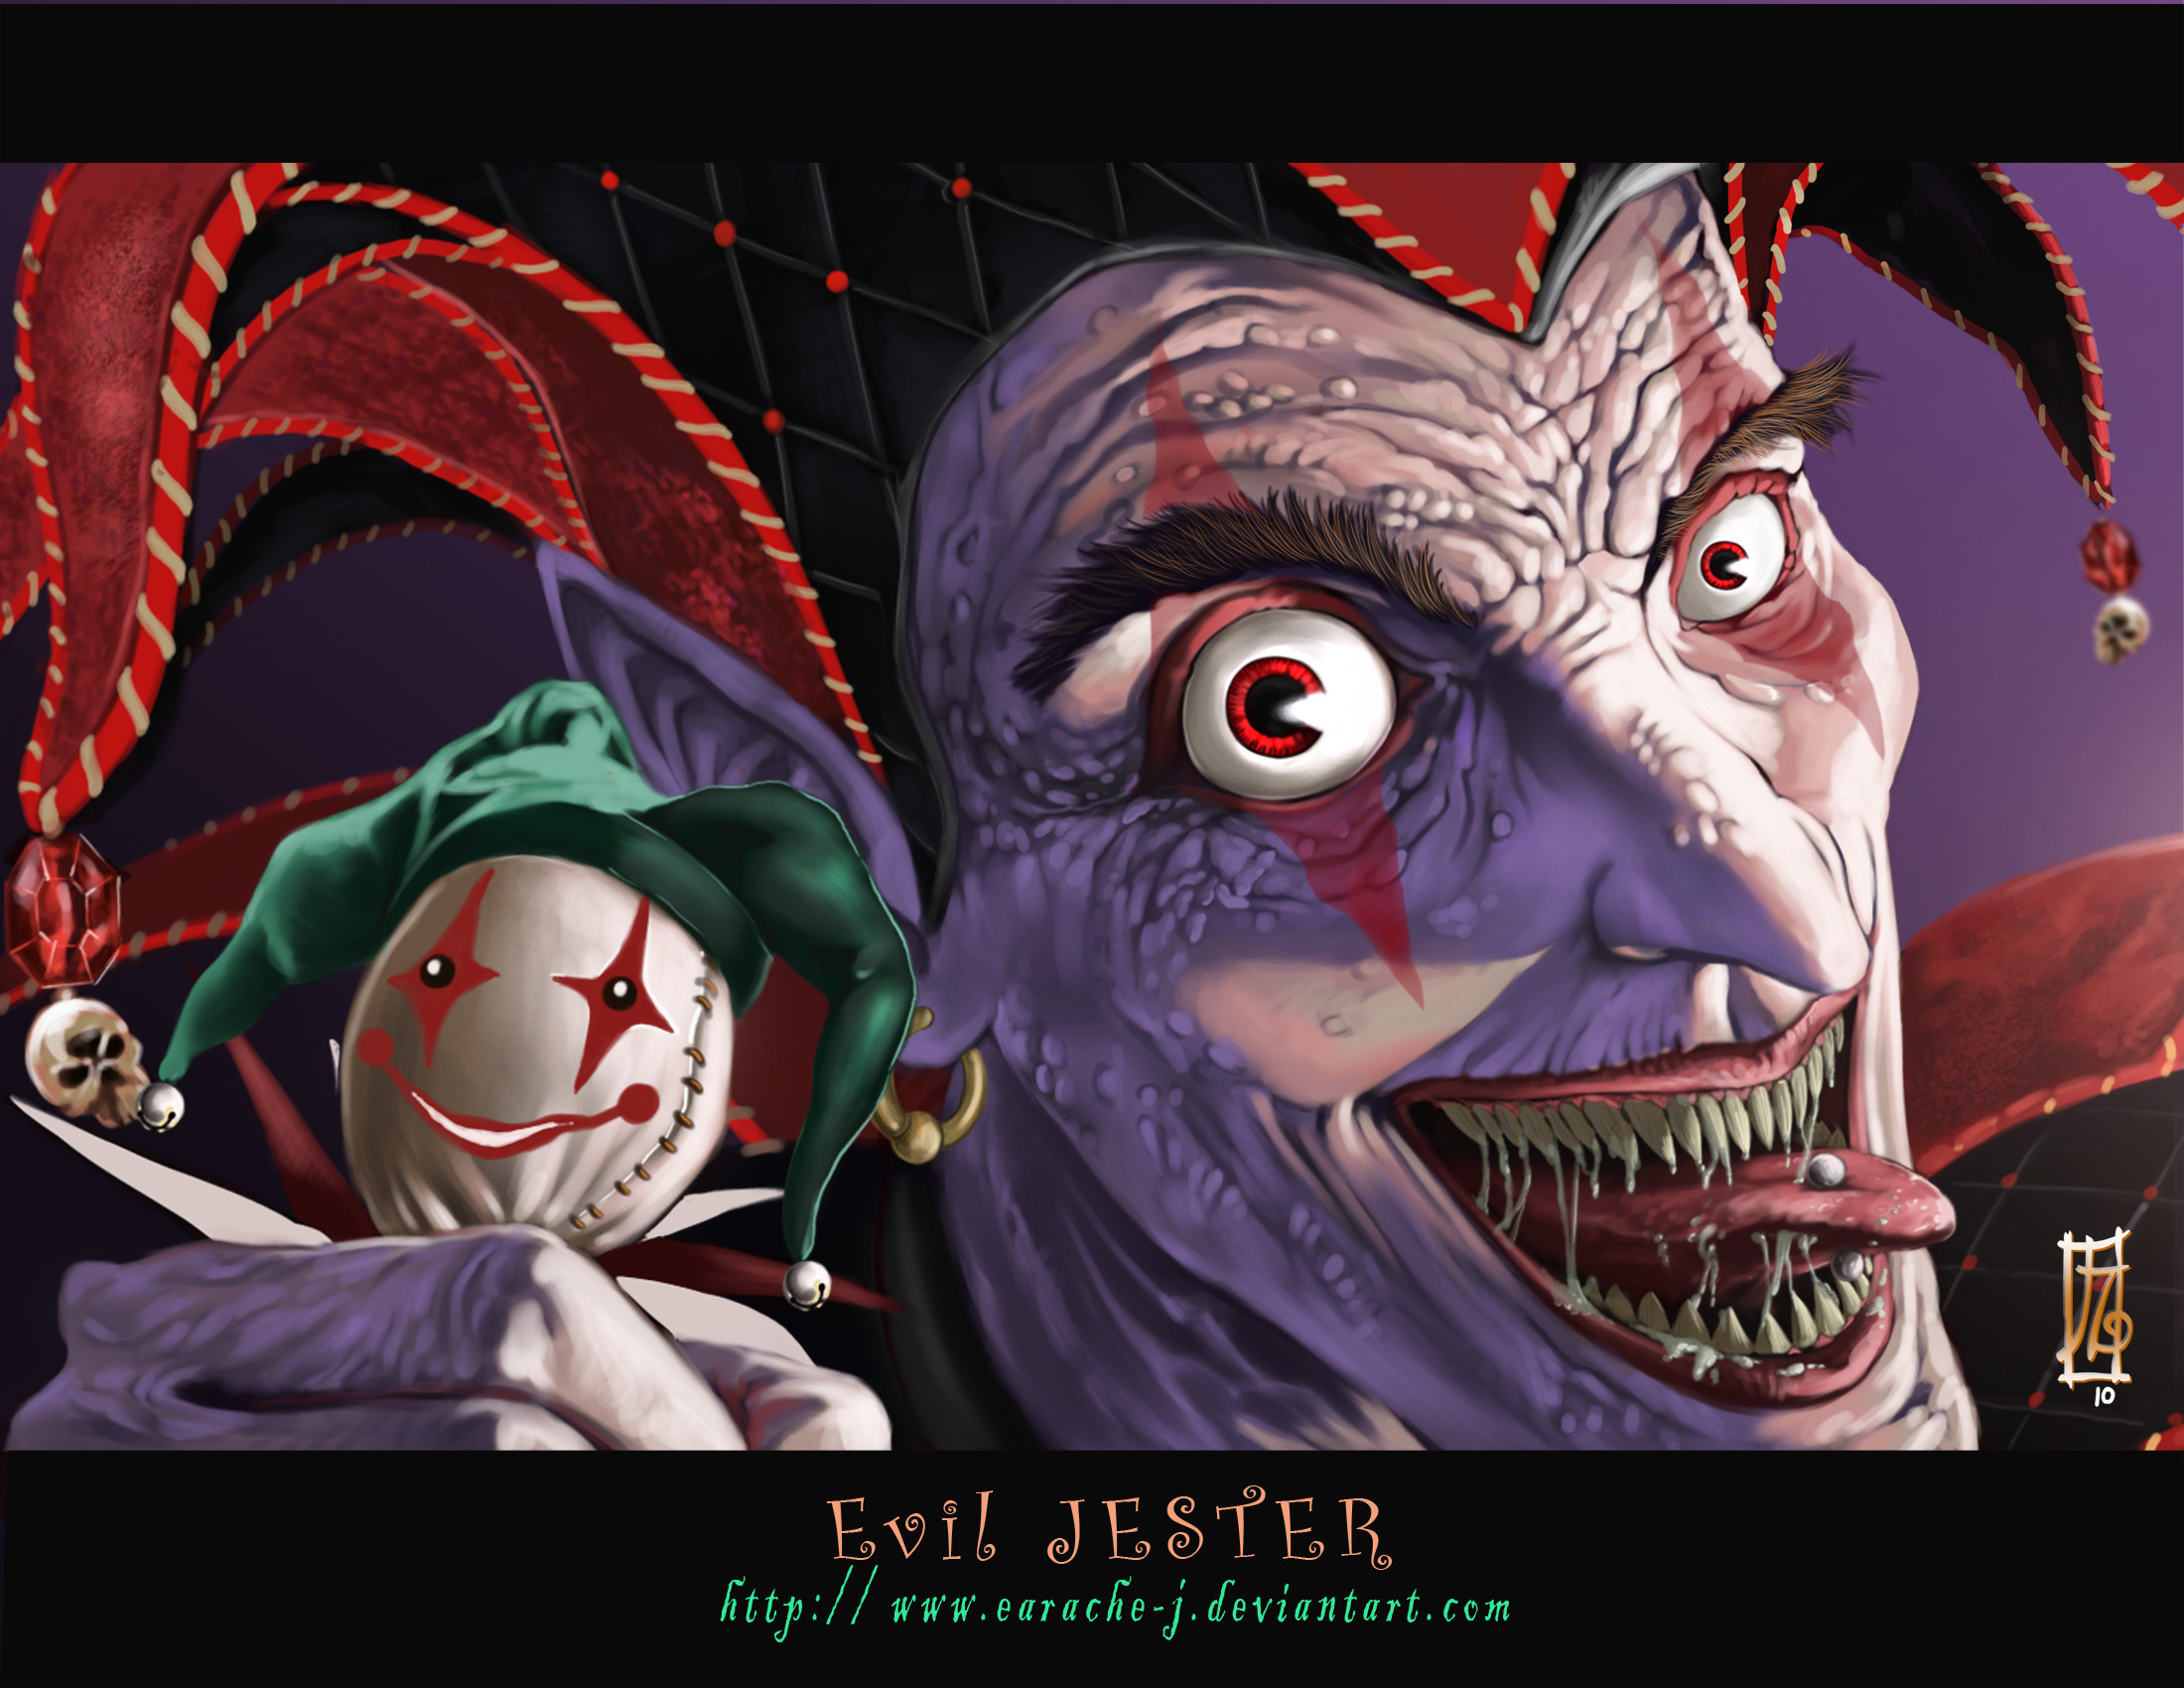 2200x1700 Evil Jester wallpaper from Clowns wallpapers